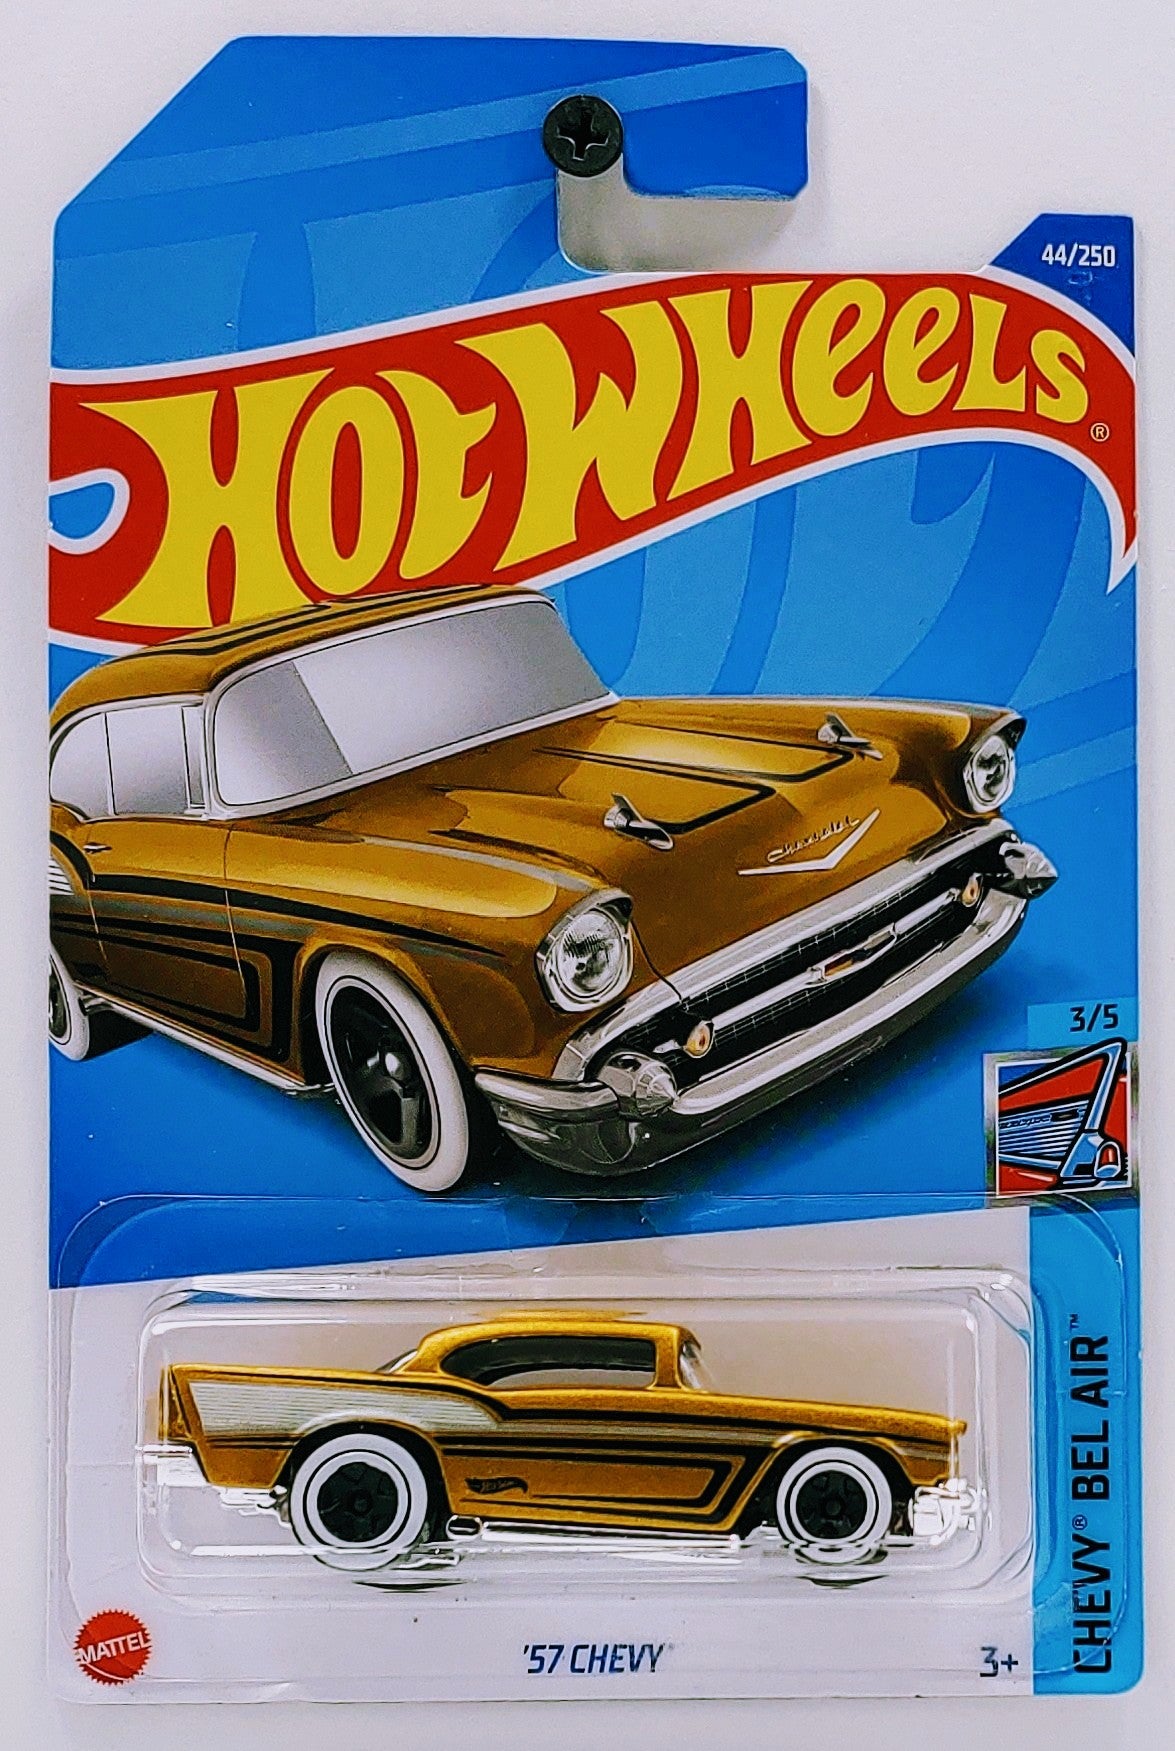 Hot Wheels 2022 - Collector # 044/250 - Chevy Bel Air 3/5 - '57 Chevy - Gold - IC